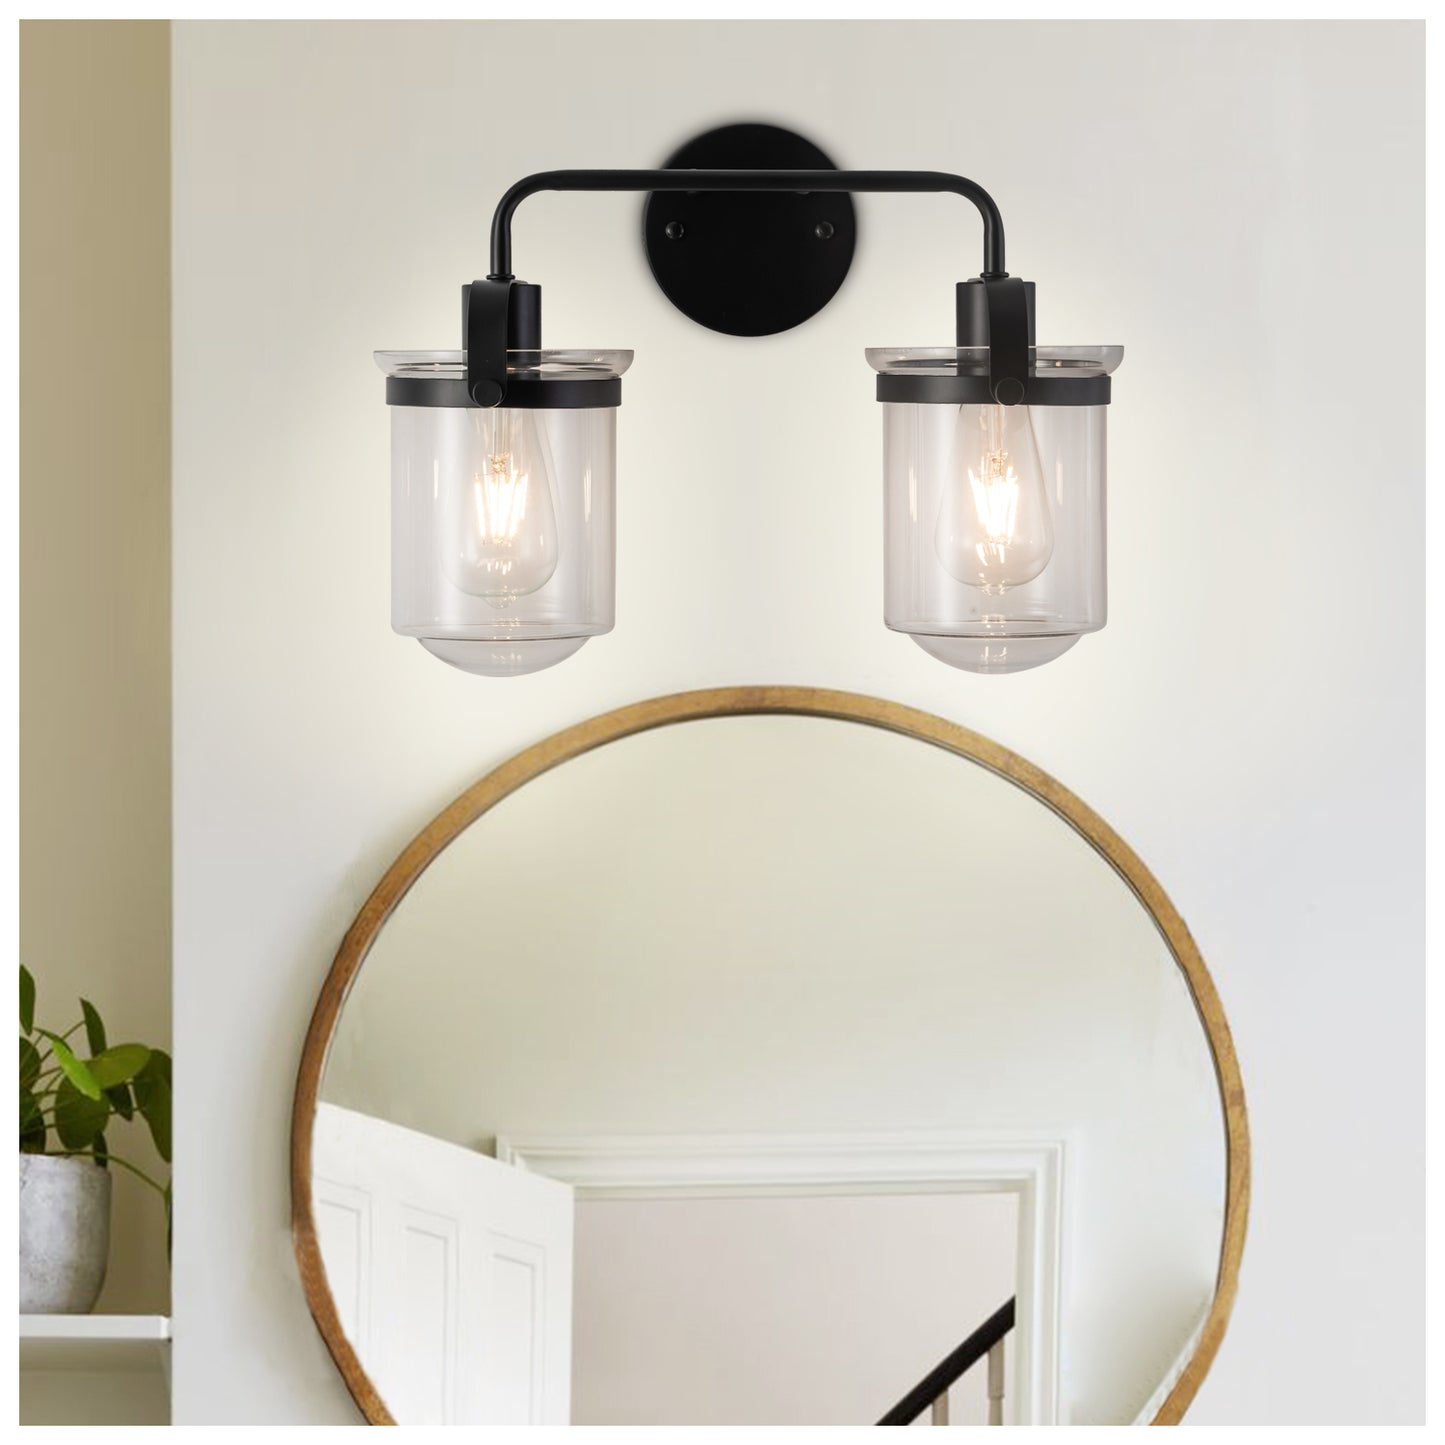 Wall Sconces Set of 2 with Clear Glass Shade, Modern Wall Sconce, Industrial Indoor Wall Light Fixture for Bathroom Living Room Bedroom Over Kitchen Sink, E26 Socket, Bulbs Not Included